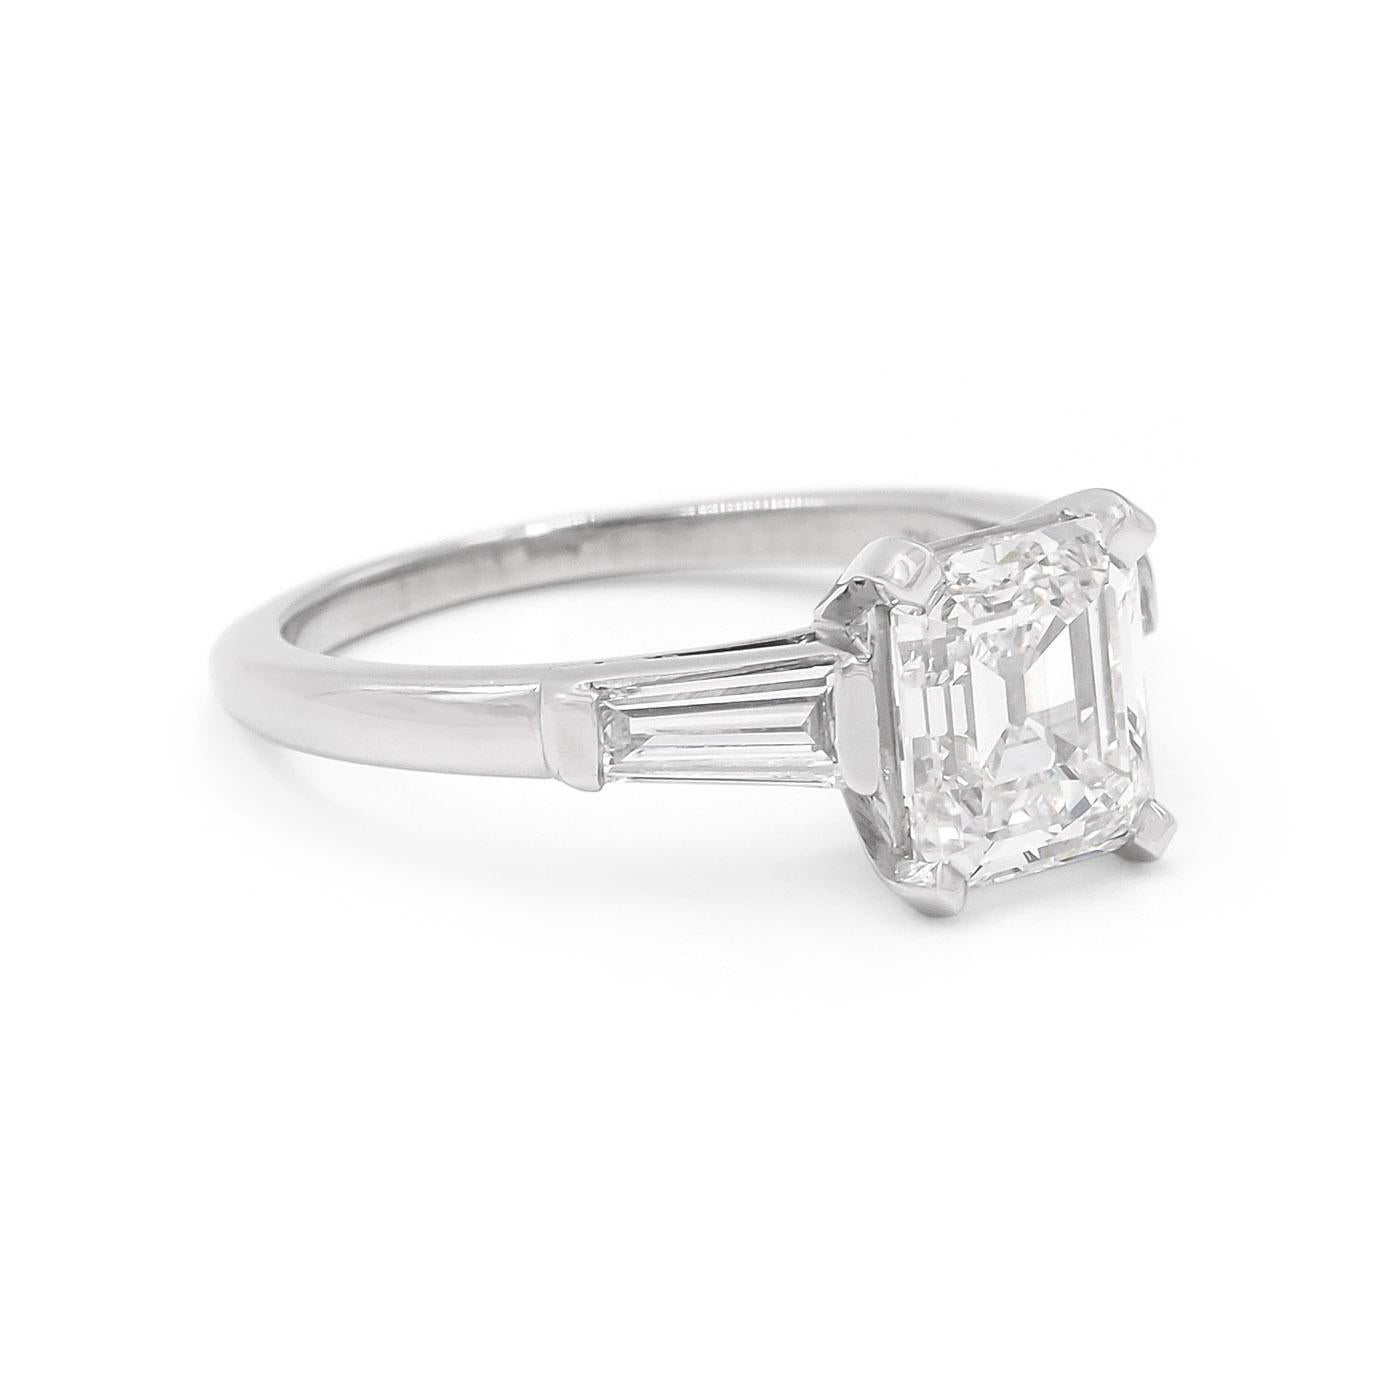 American Mid-Century 1.71 Carat Emerald Cut Diamond Engagement Ring by Tiffany & Co., composed of platinum. With a 1.71 carat Emerald Cut diamond, GIA certified G color & VS1 clarity. With an additional 2 Tapered Baguette Cut diamonds set into the